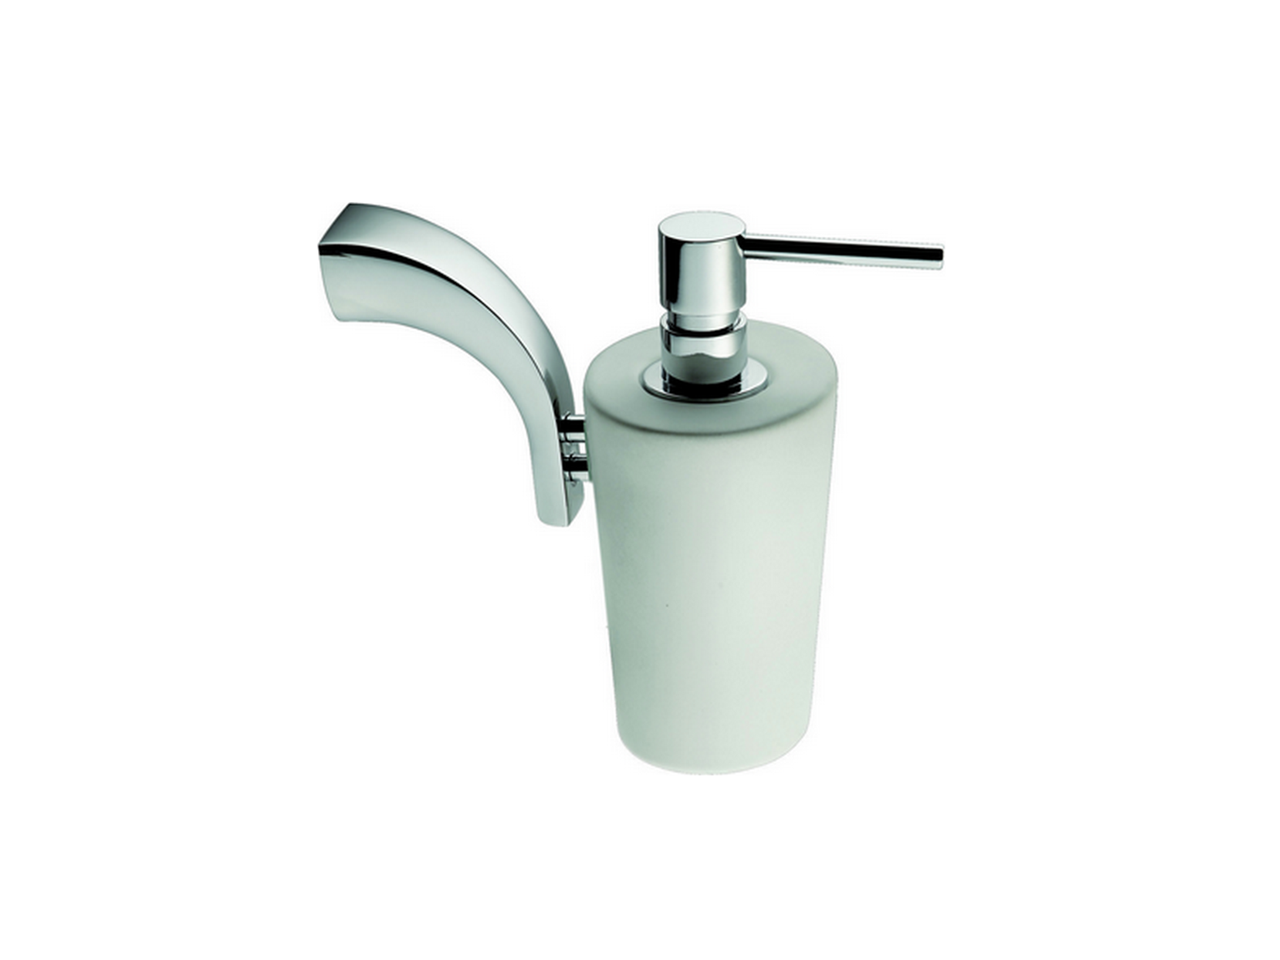 CisalWall mounted soap dispenser BATHROOM ACCESSORIES_AE090620